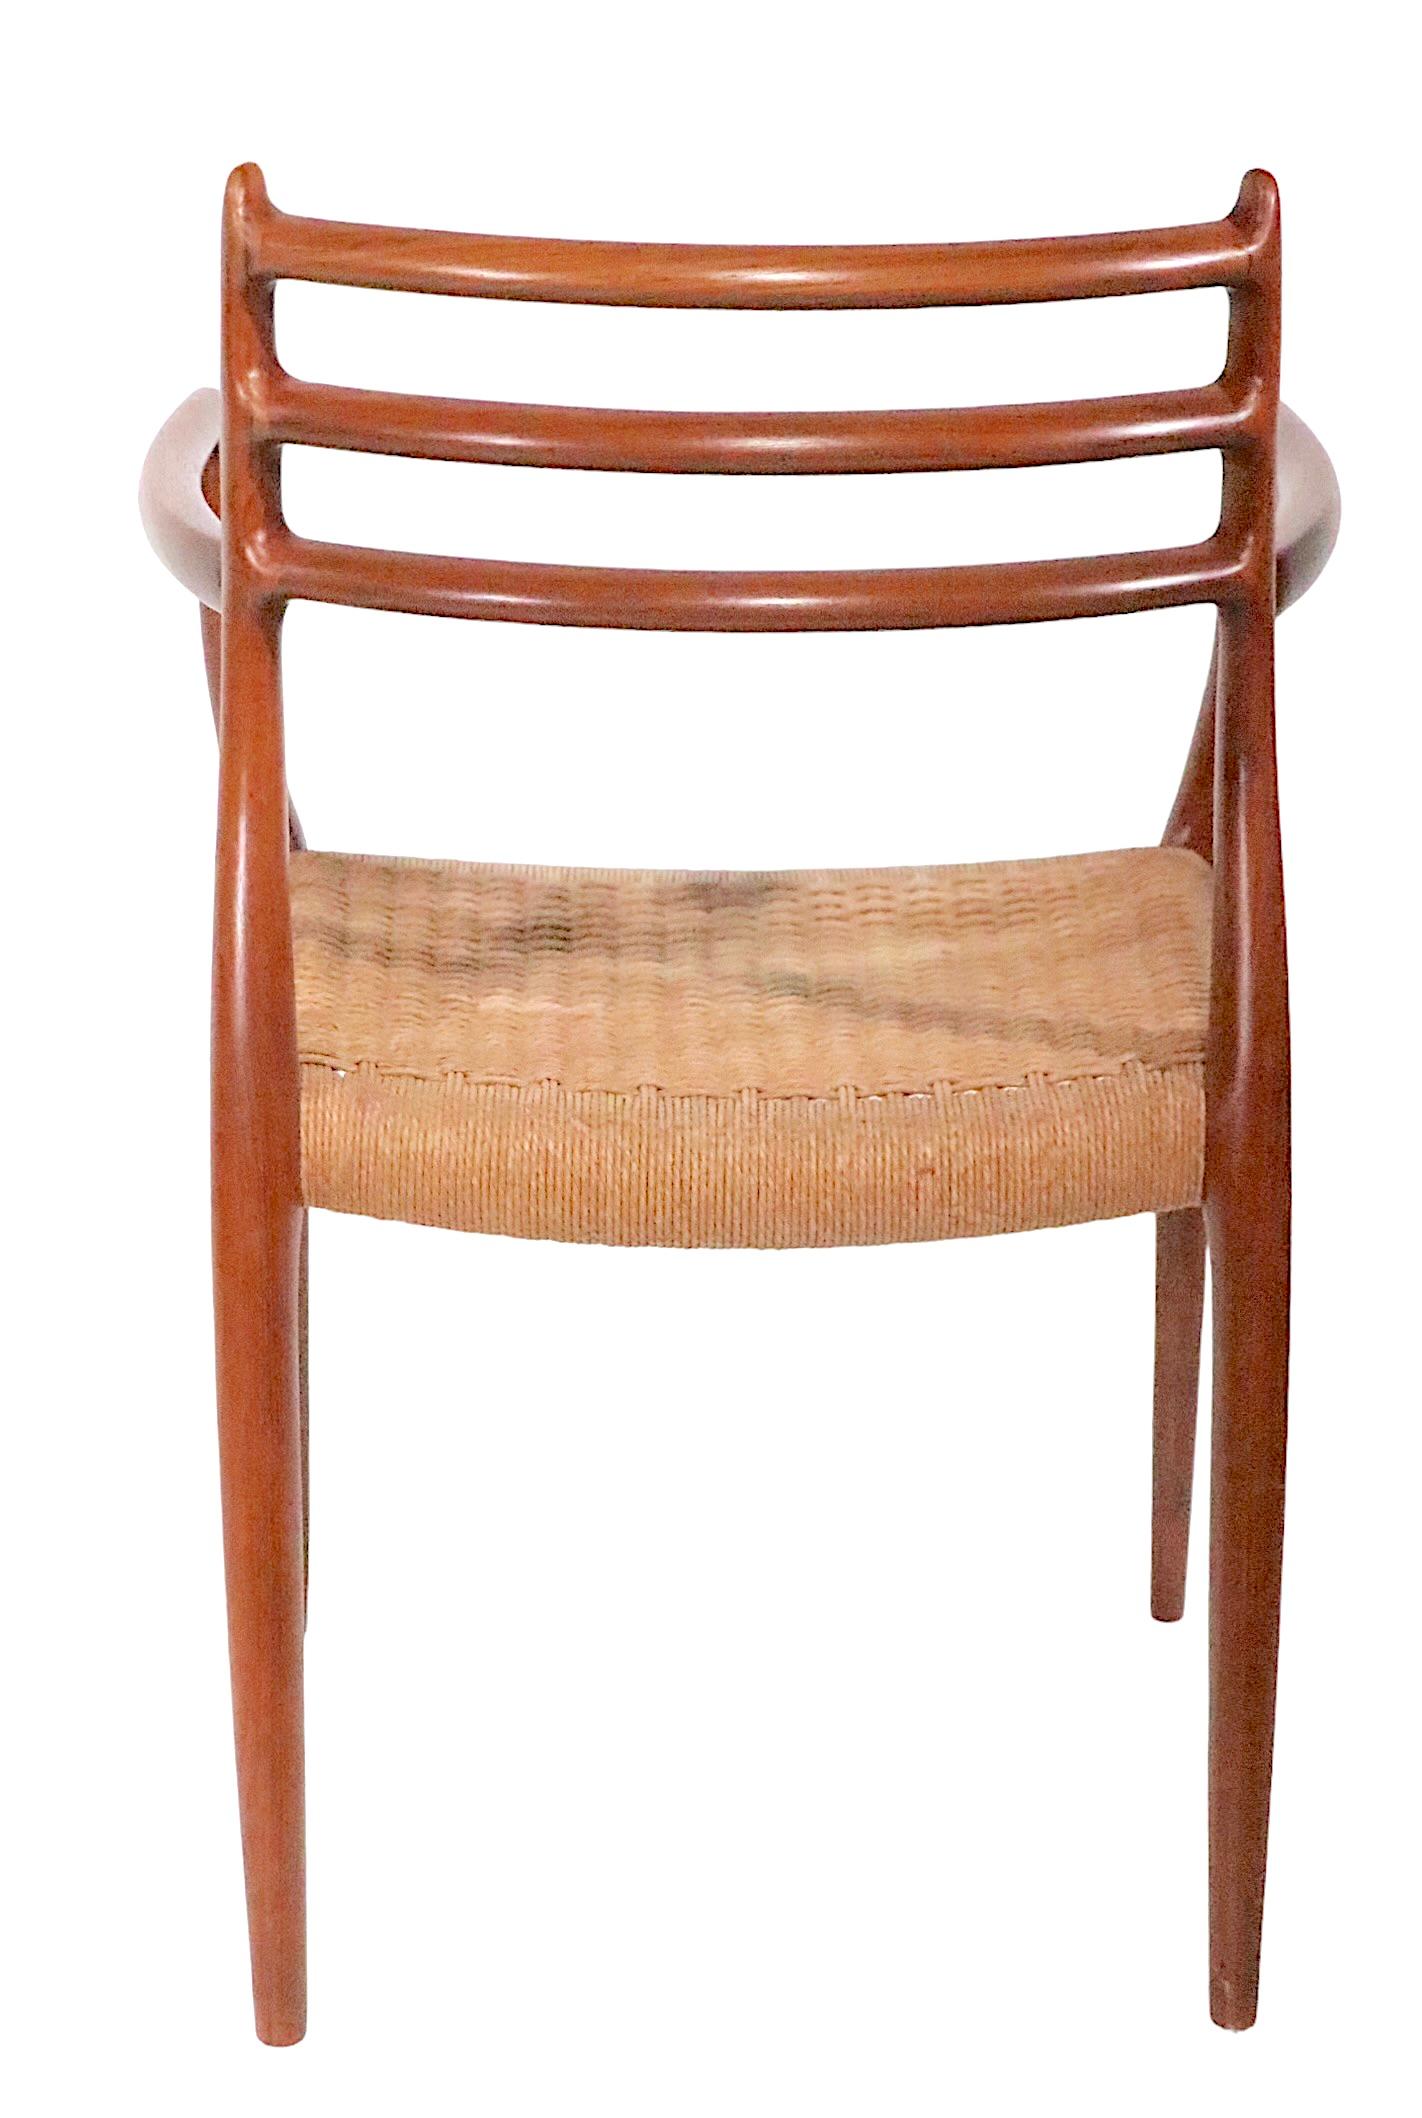 Danish Set of Eight Teak Dining Chairs by Neils Moller / J.L.Moller, circa 1960s For Sale 5